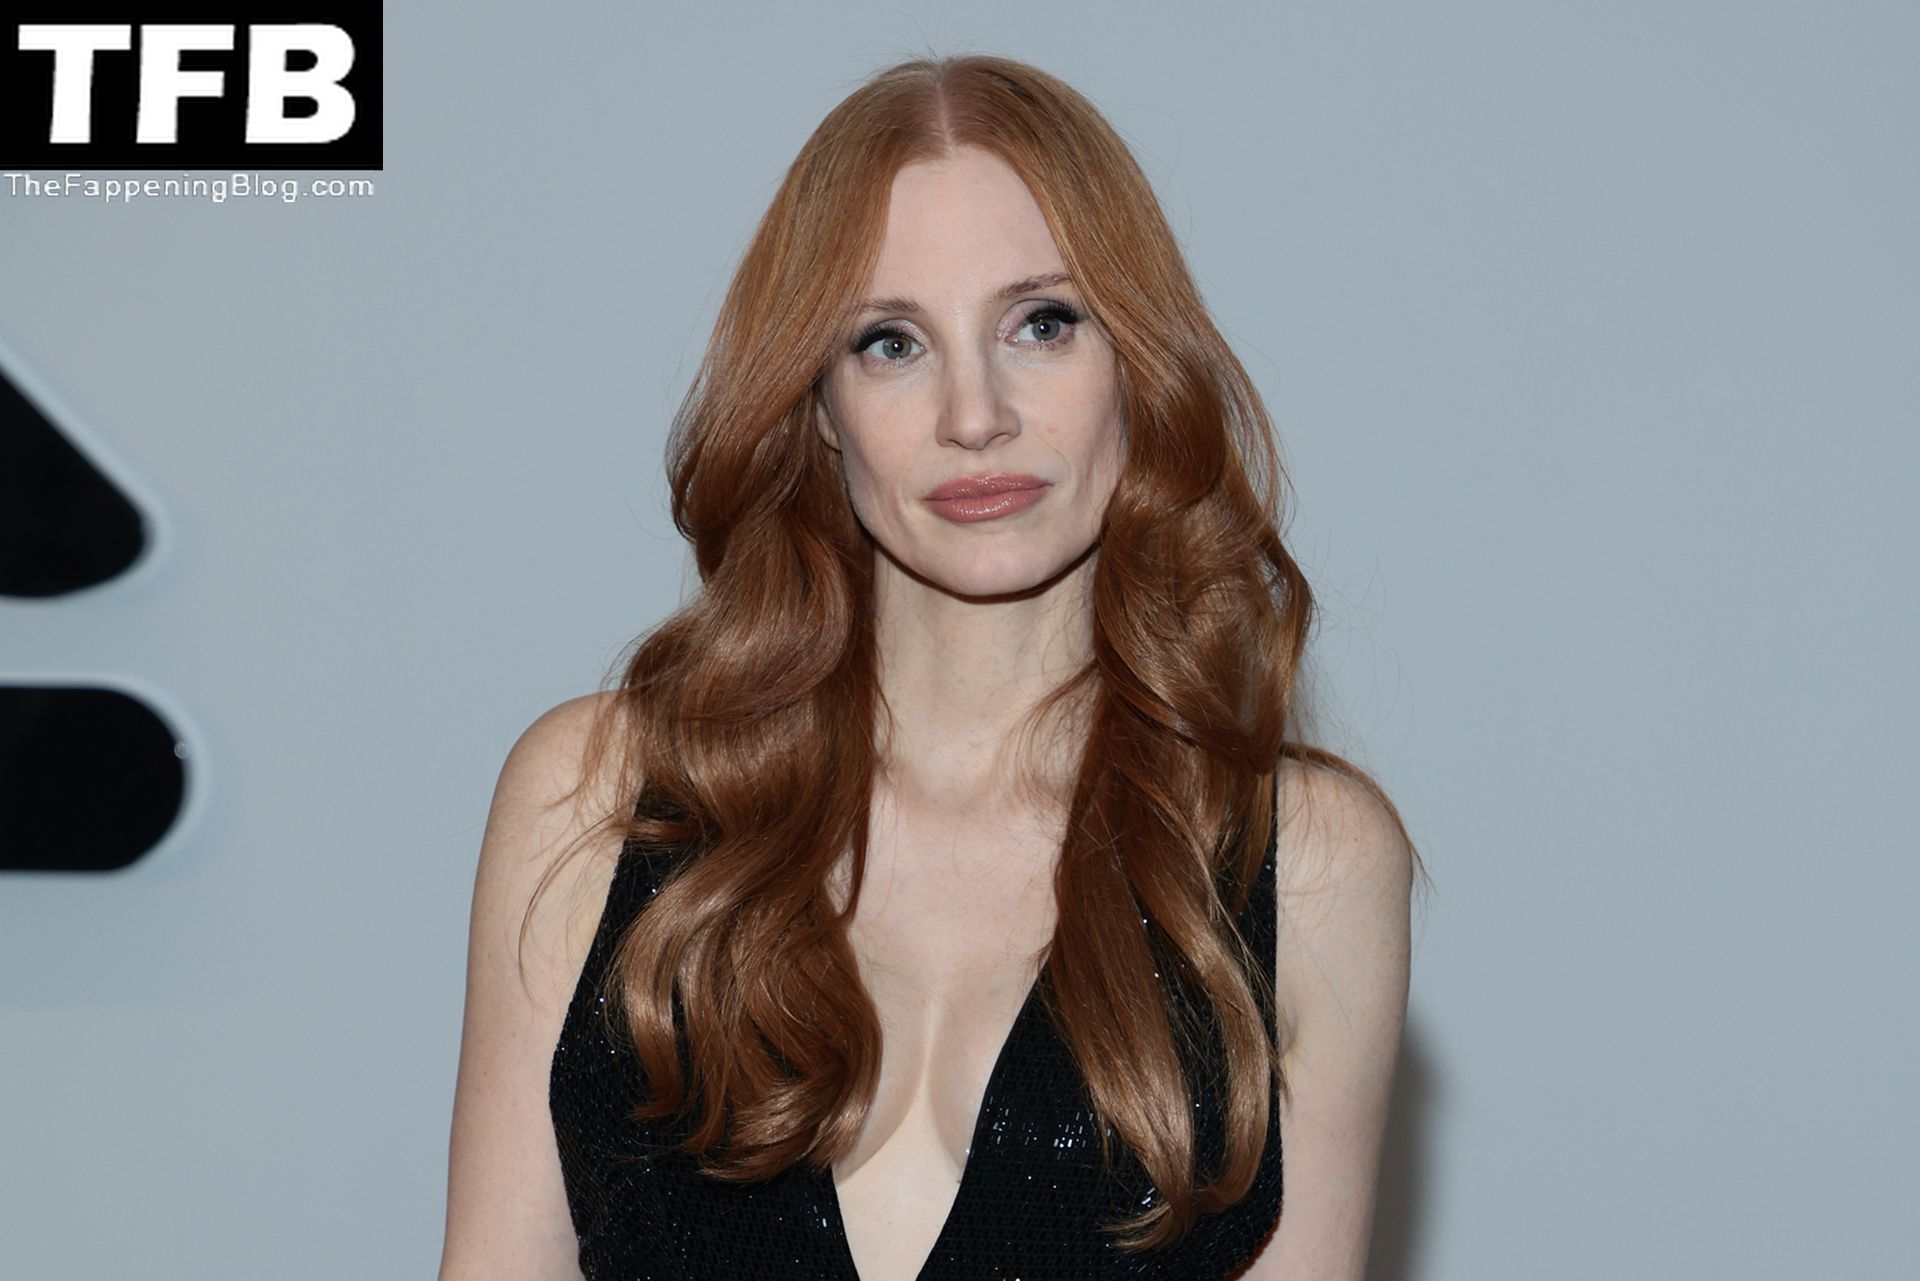 Jessica-Chastain-Sexy-The-Fappening-Blog-10.jpg